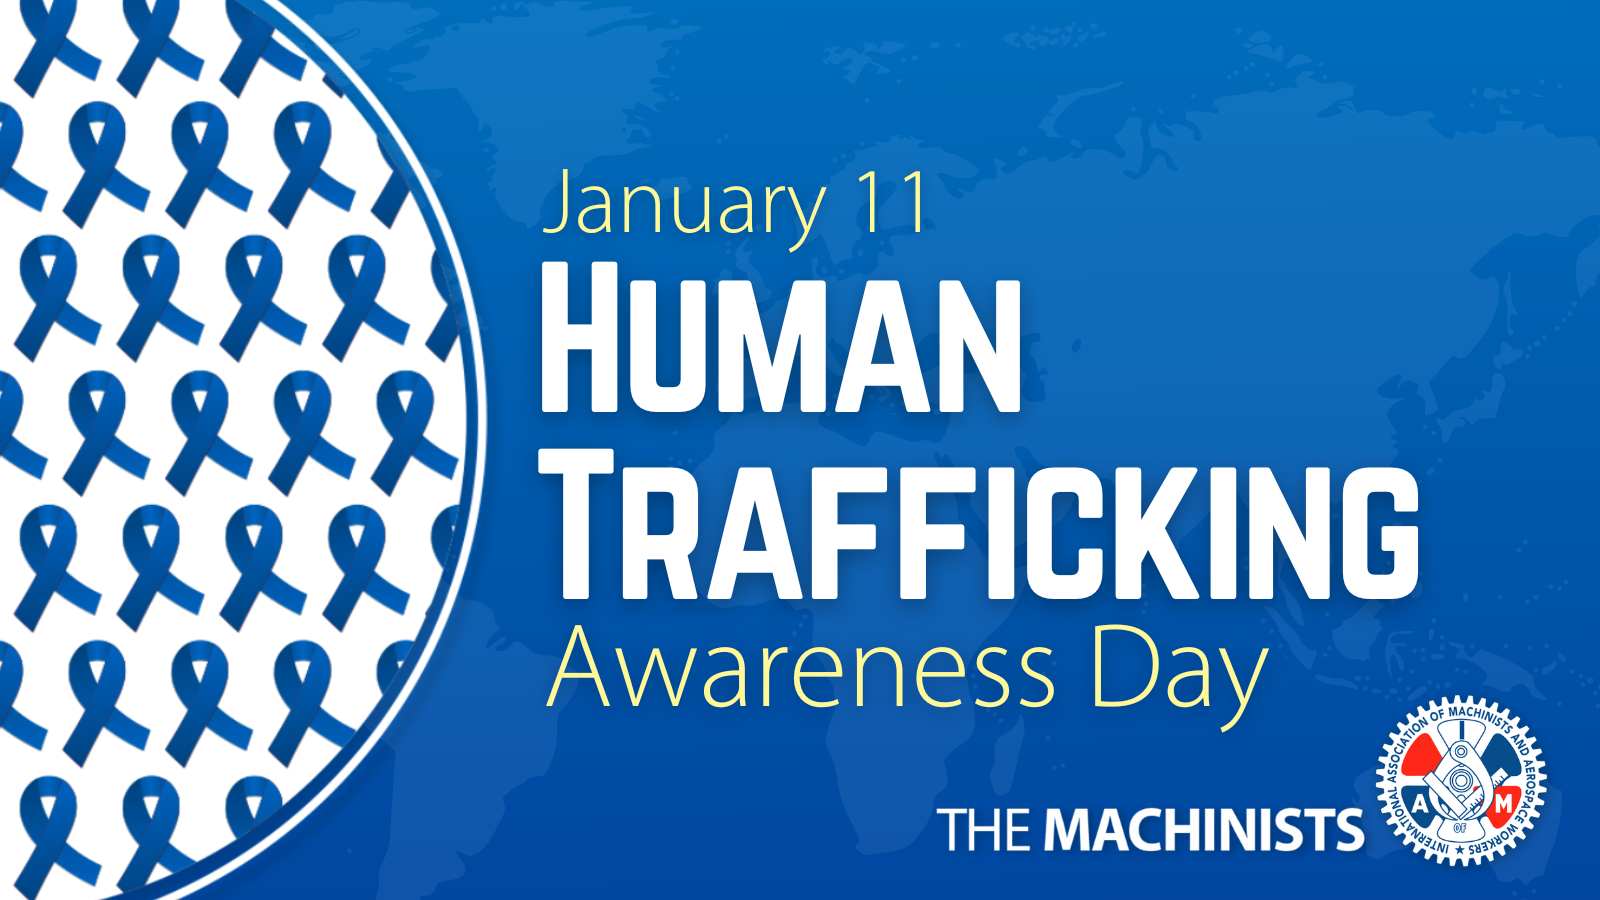 Wear Blue on Wednesday, January 11th for National Human Trafficking Awareness